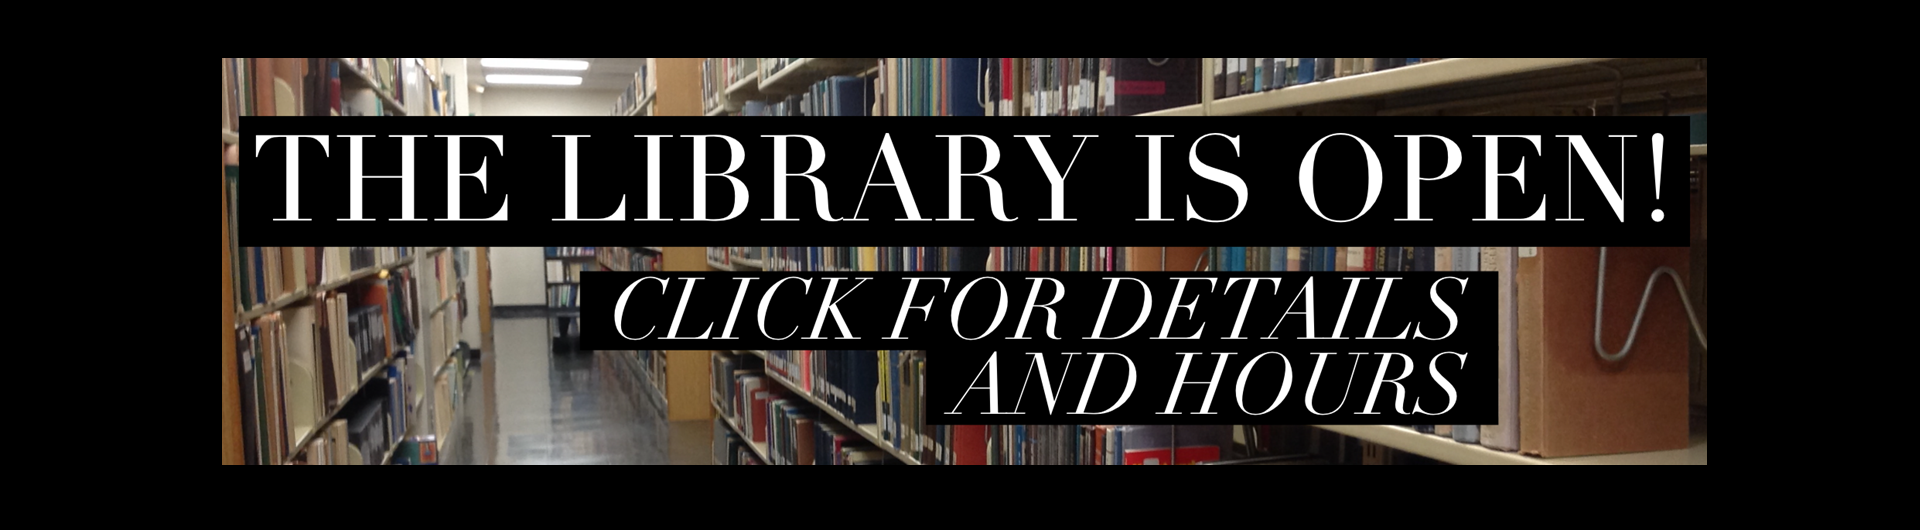 Library is Open, click for details and updates